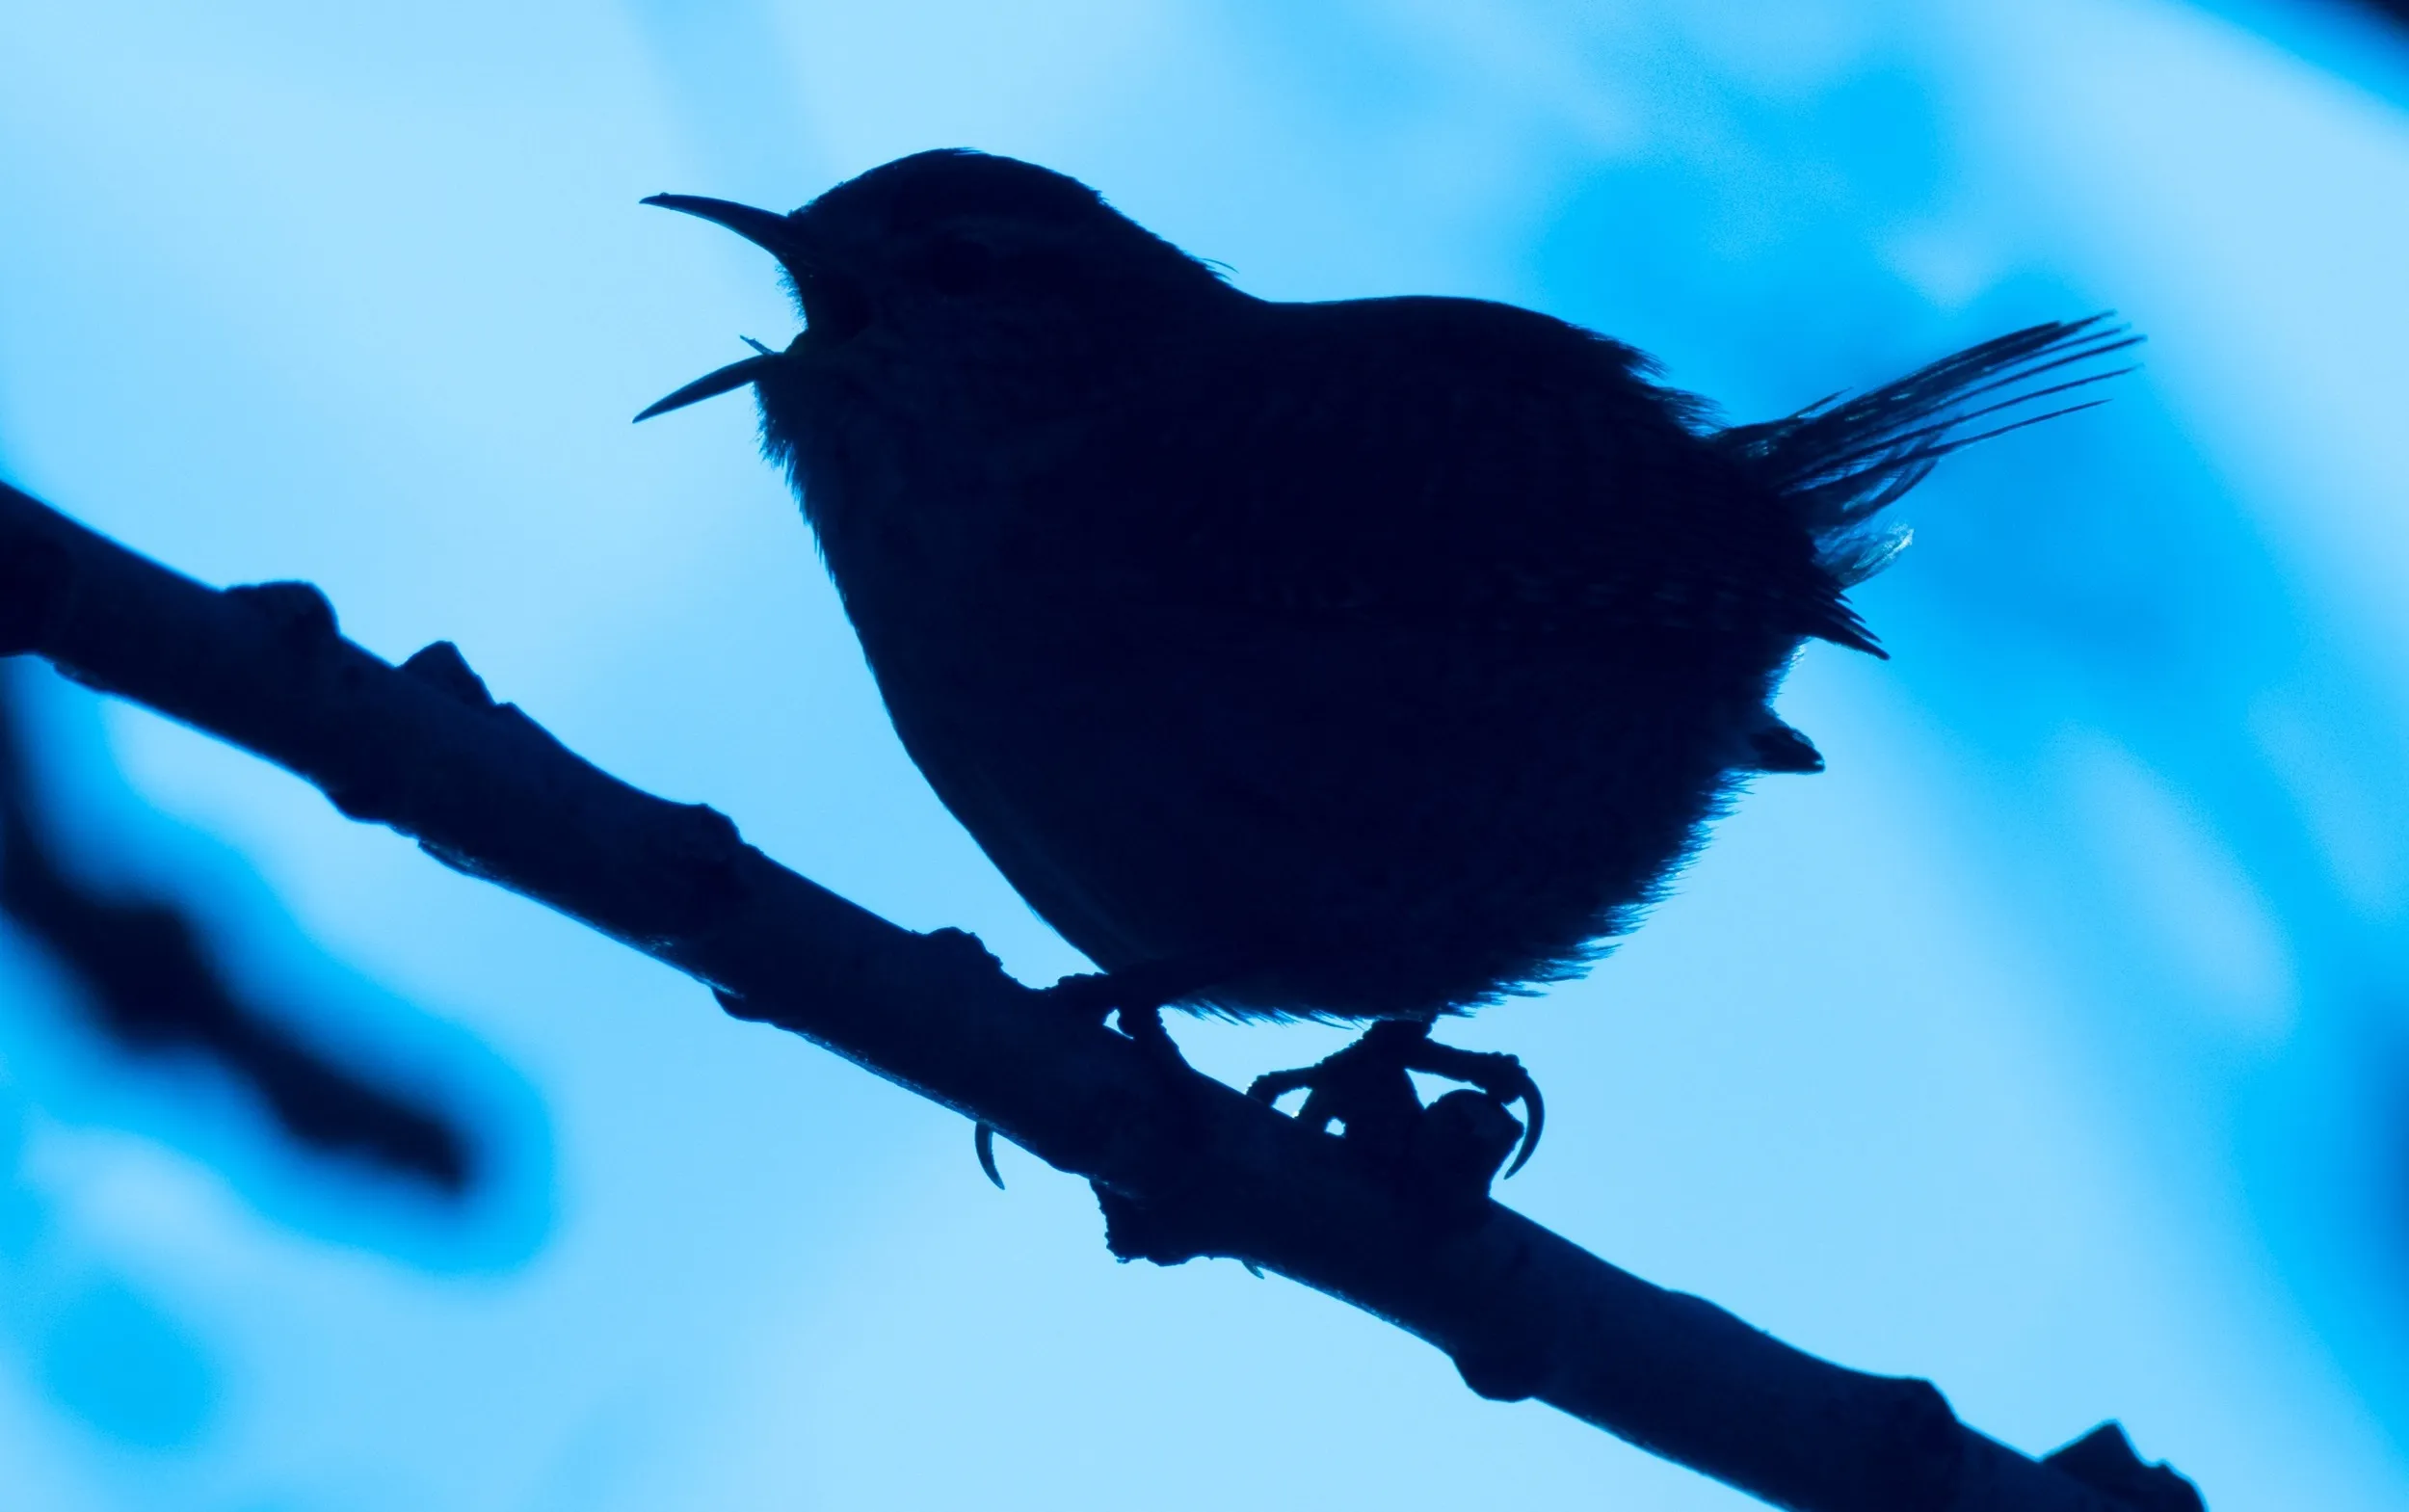 A Wren in silhouette, singing at dawn. 